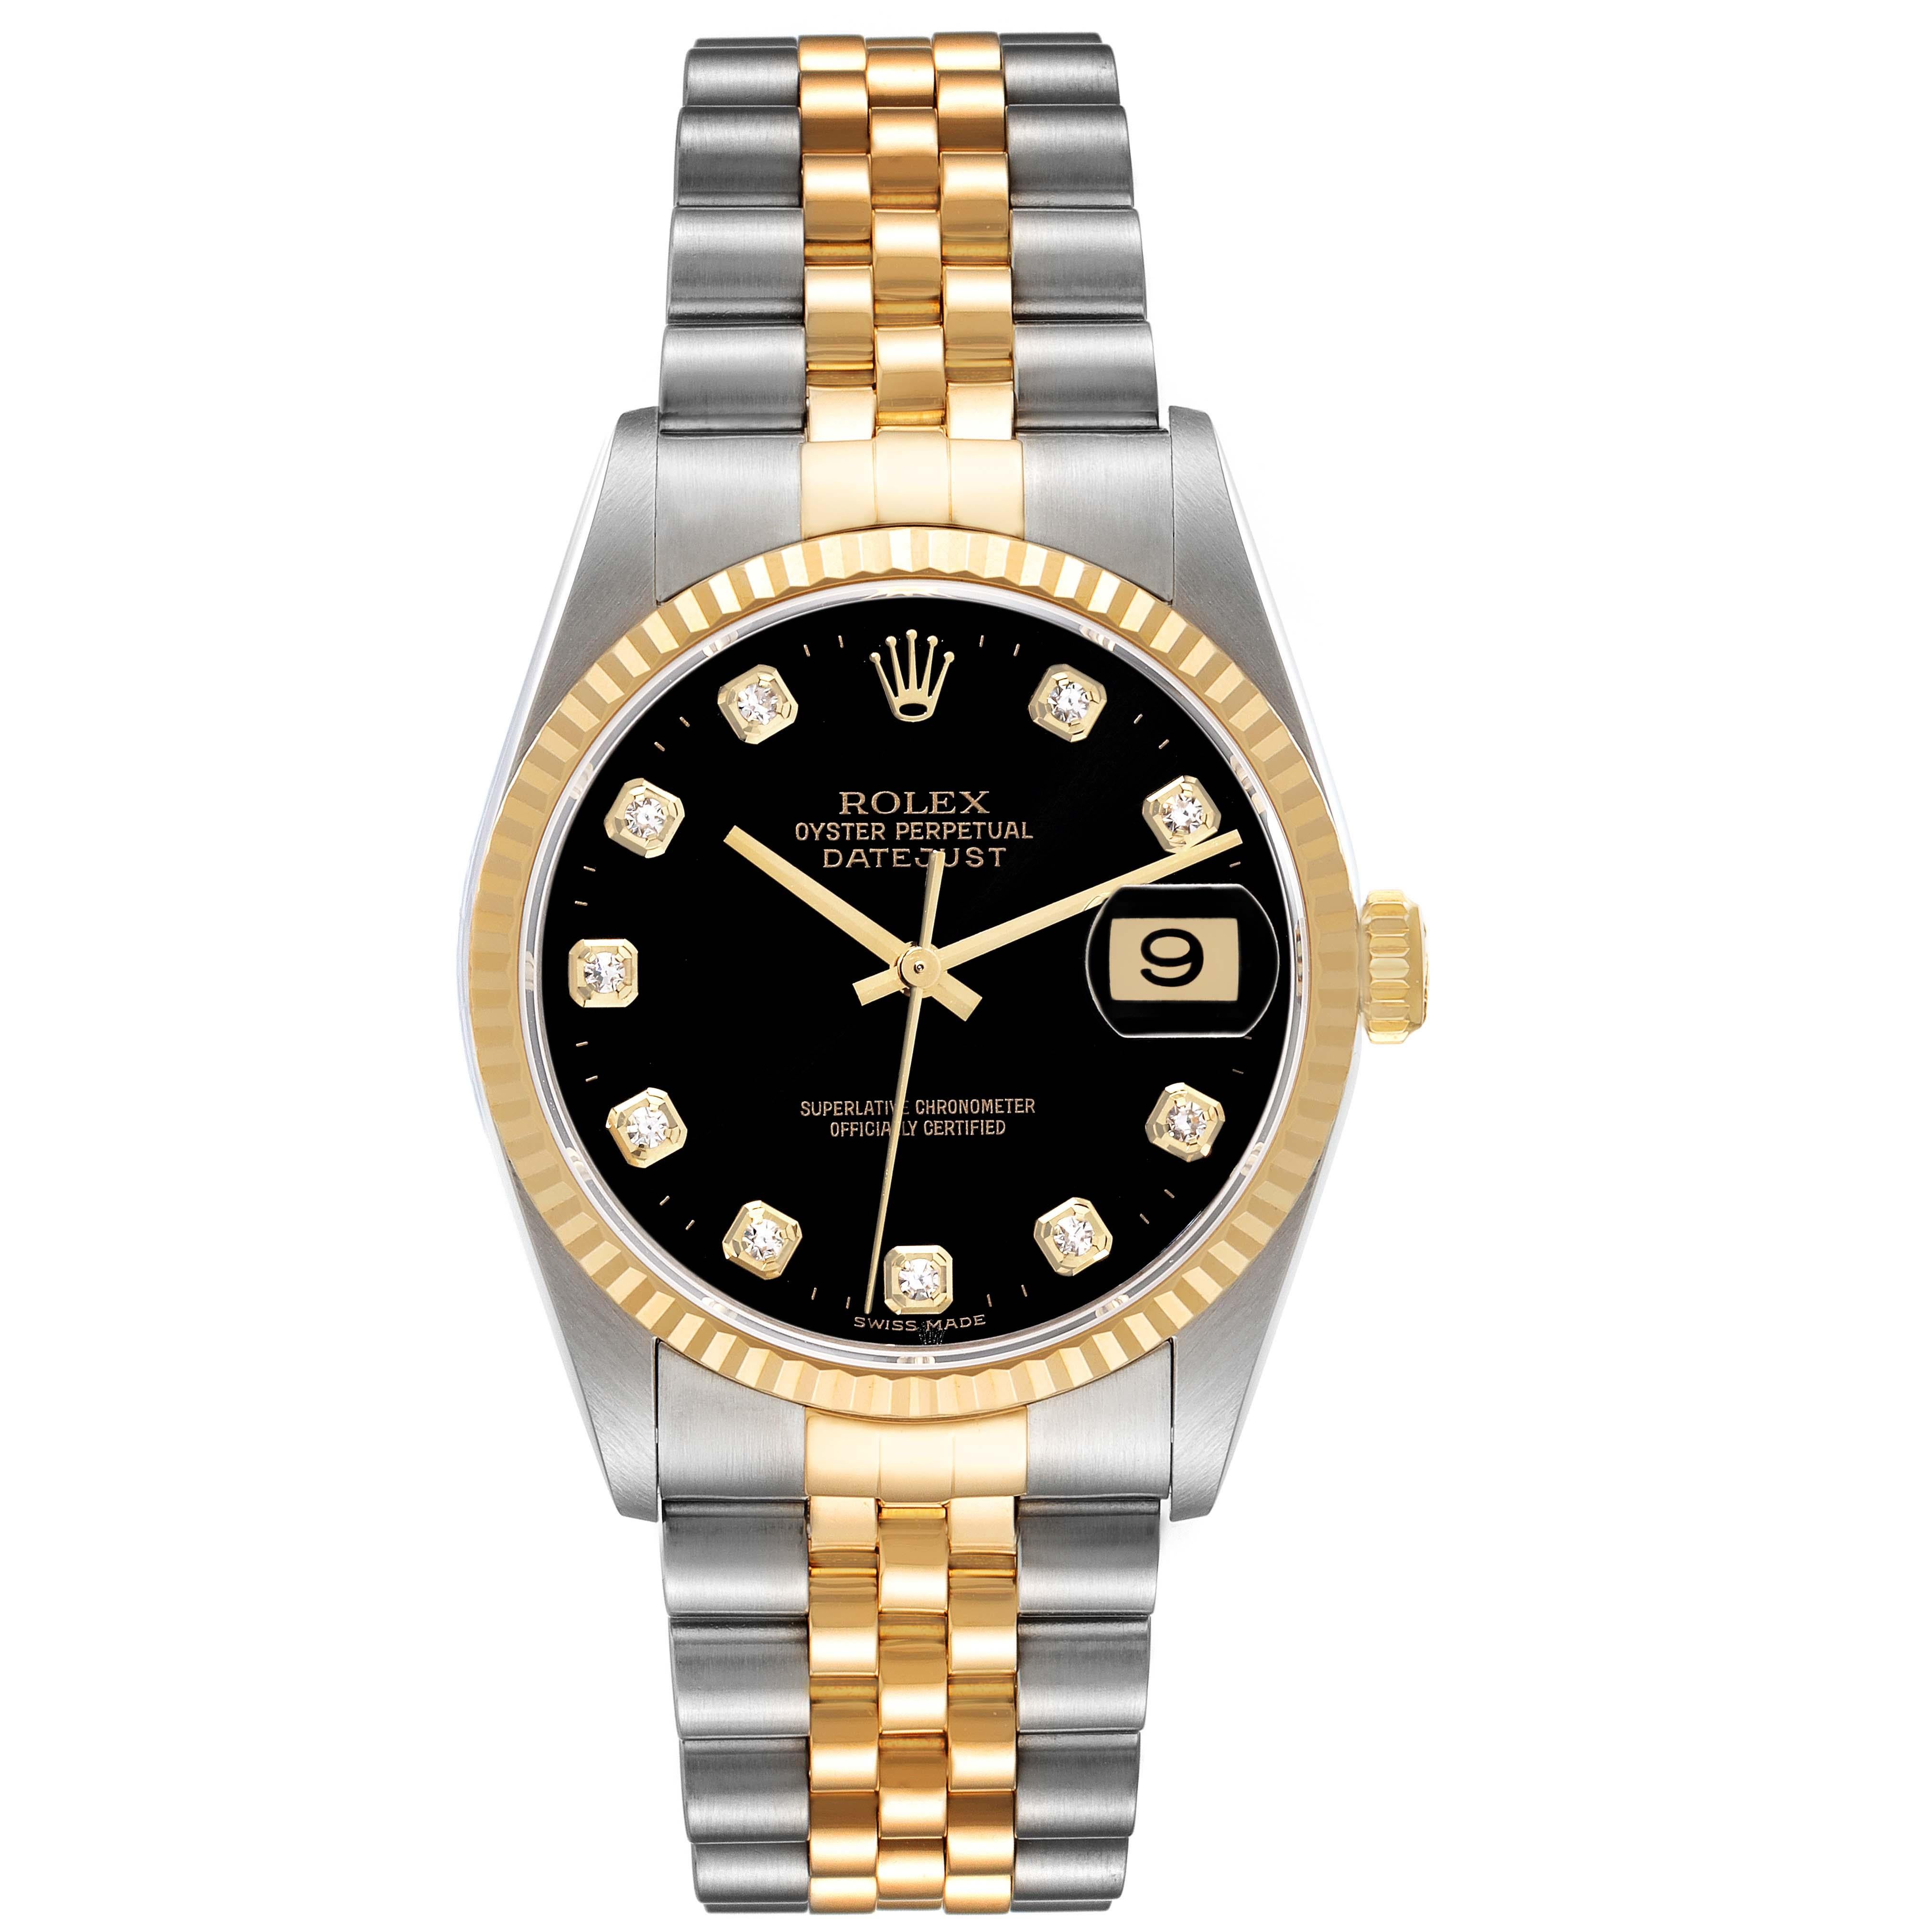 Rolex Datejust Steel Yellow Gold Black Diamond Dial Mens Watch 16233 Box Papers. Officially certified chronometer automatic self-winding movement. Stainless steel case 36 mm in diameter.  Rolex logo on an 18K yellow gold crown. 18k yellow gold